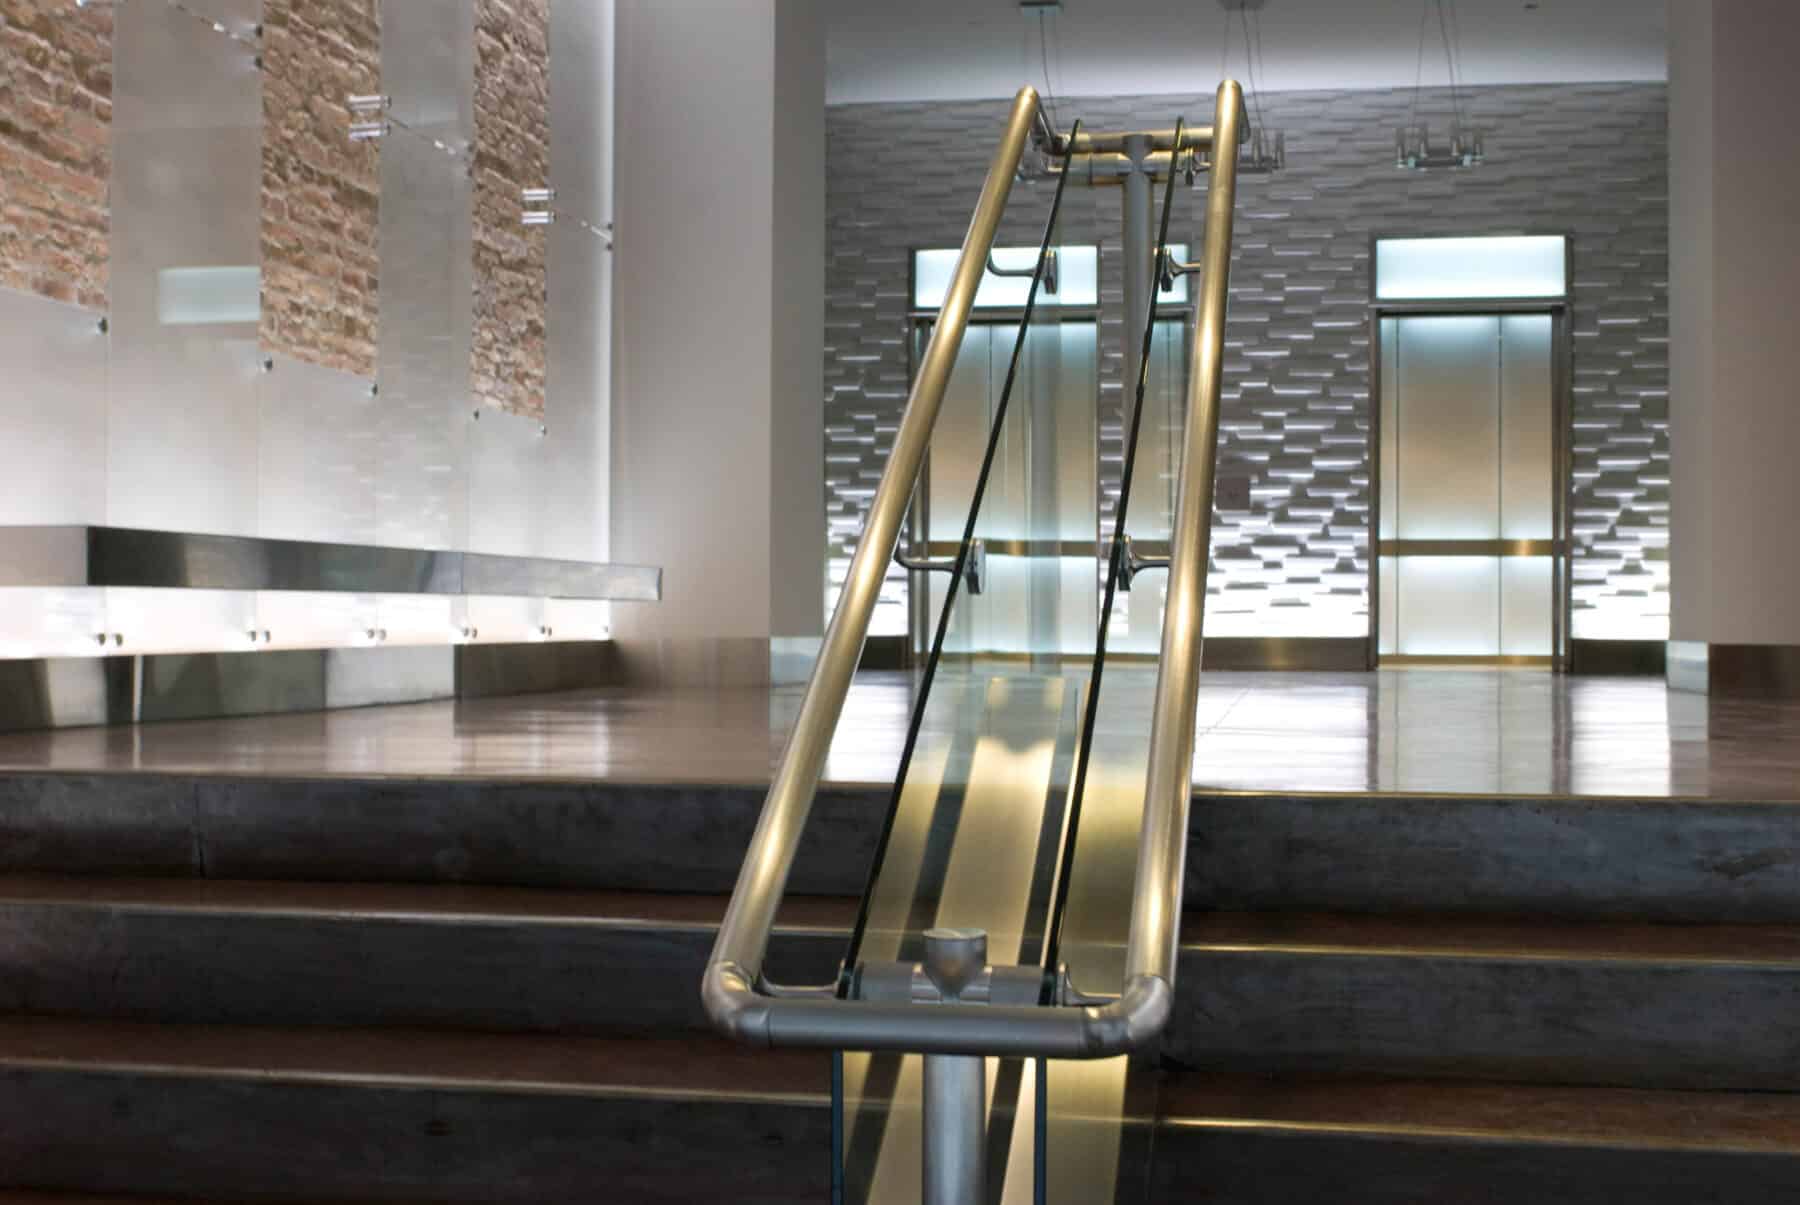 Custom Fabrication of Stainless Steel Metal and Glass Railing from Construction Specialty Projects by Commercial Builder & General Contractor Structural Enterprises